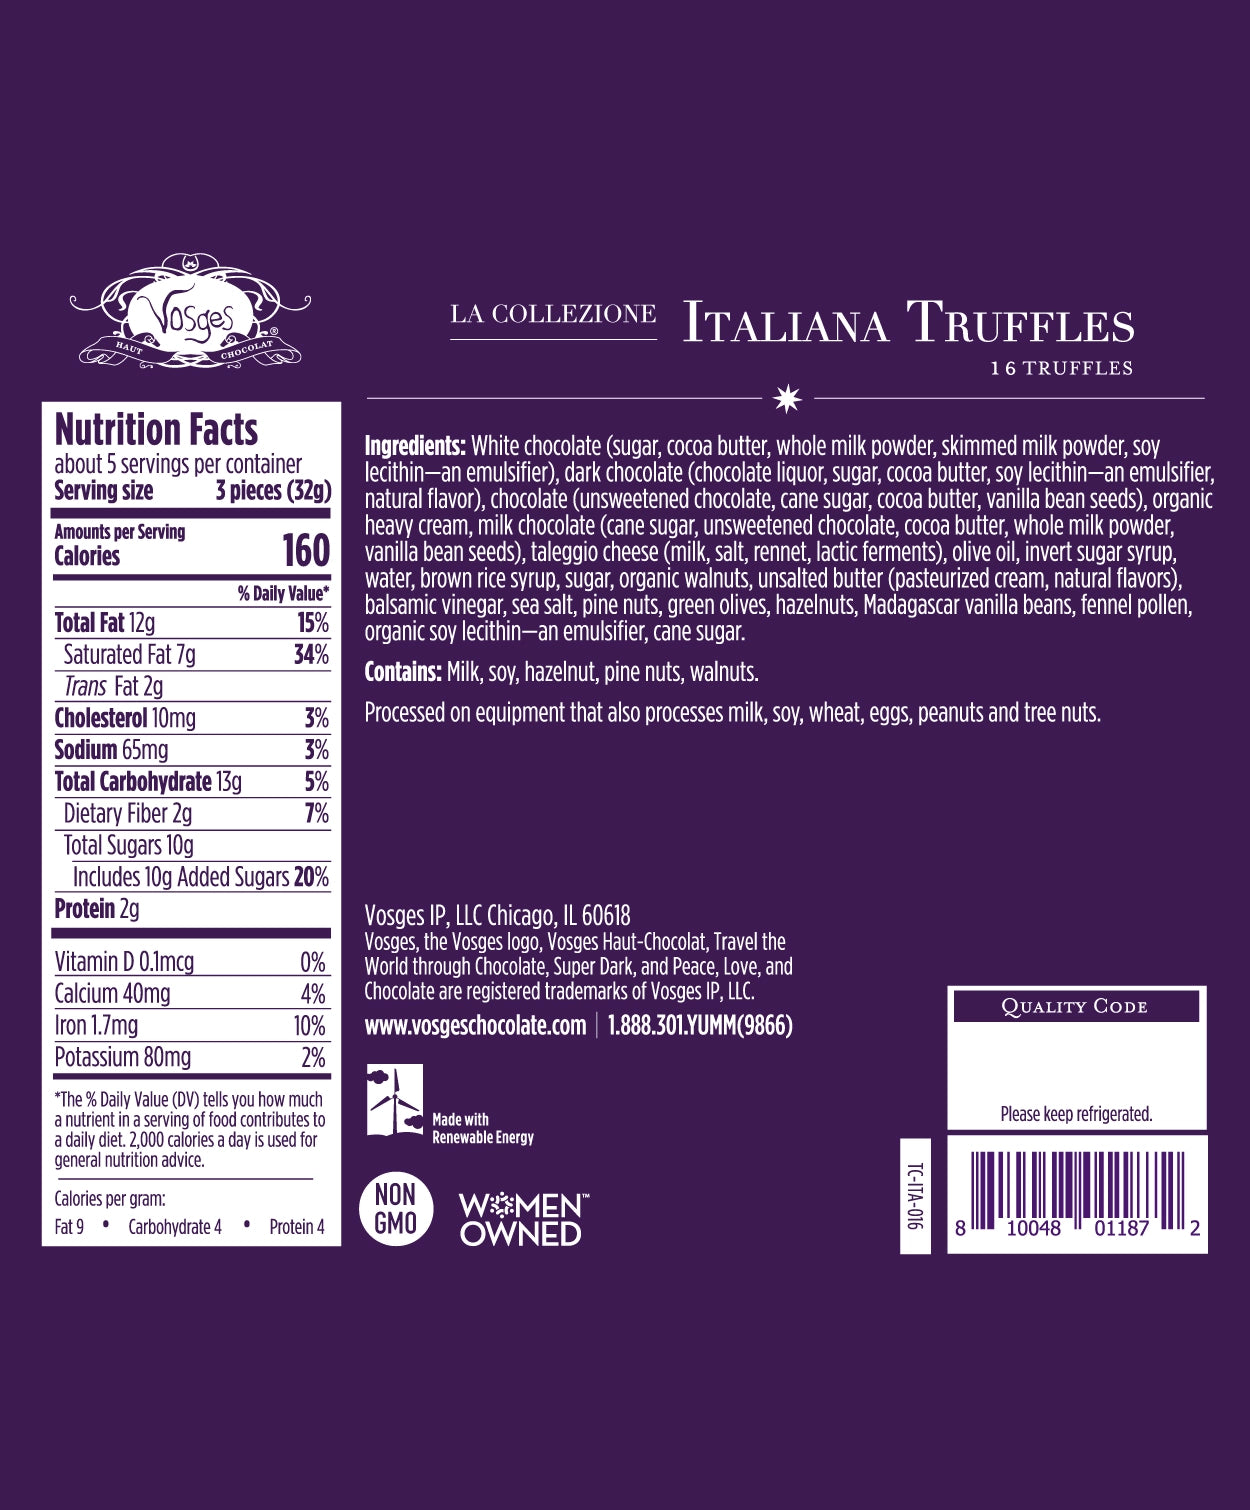 Nutrition Facts and Ingredients of Vosges Haut-Chocolat sixteen piece Italian Truffle Collection printed in white san-serif font on a dark purple background.